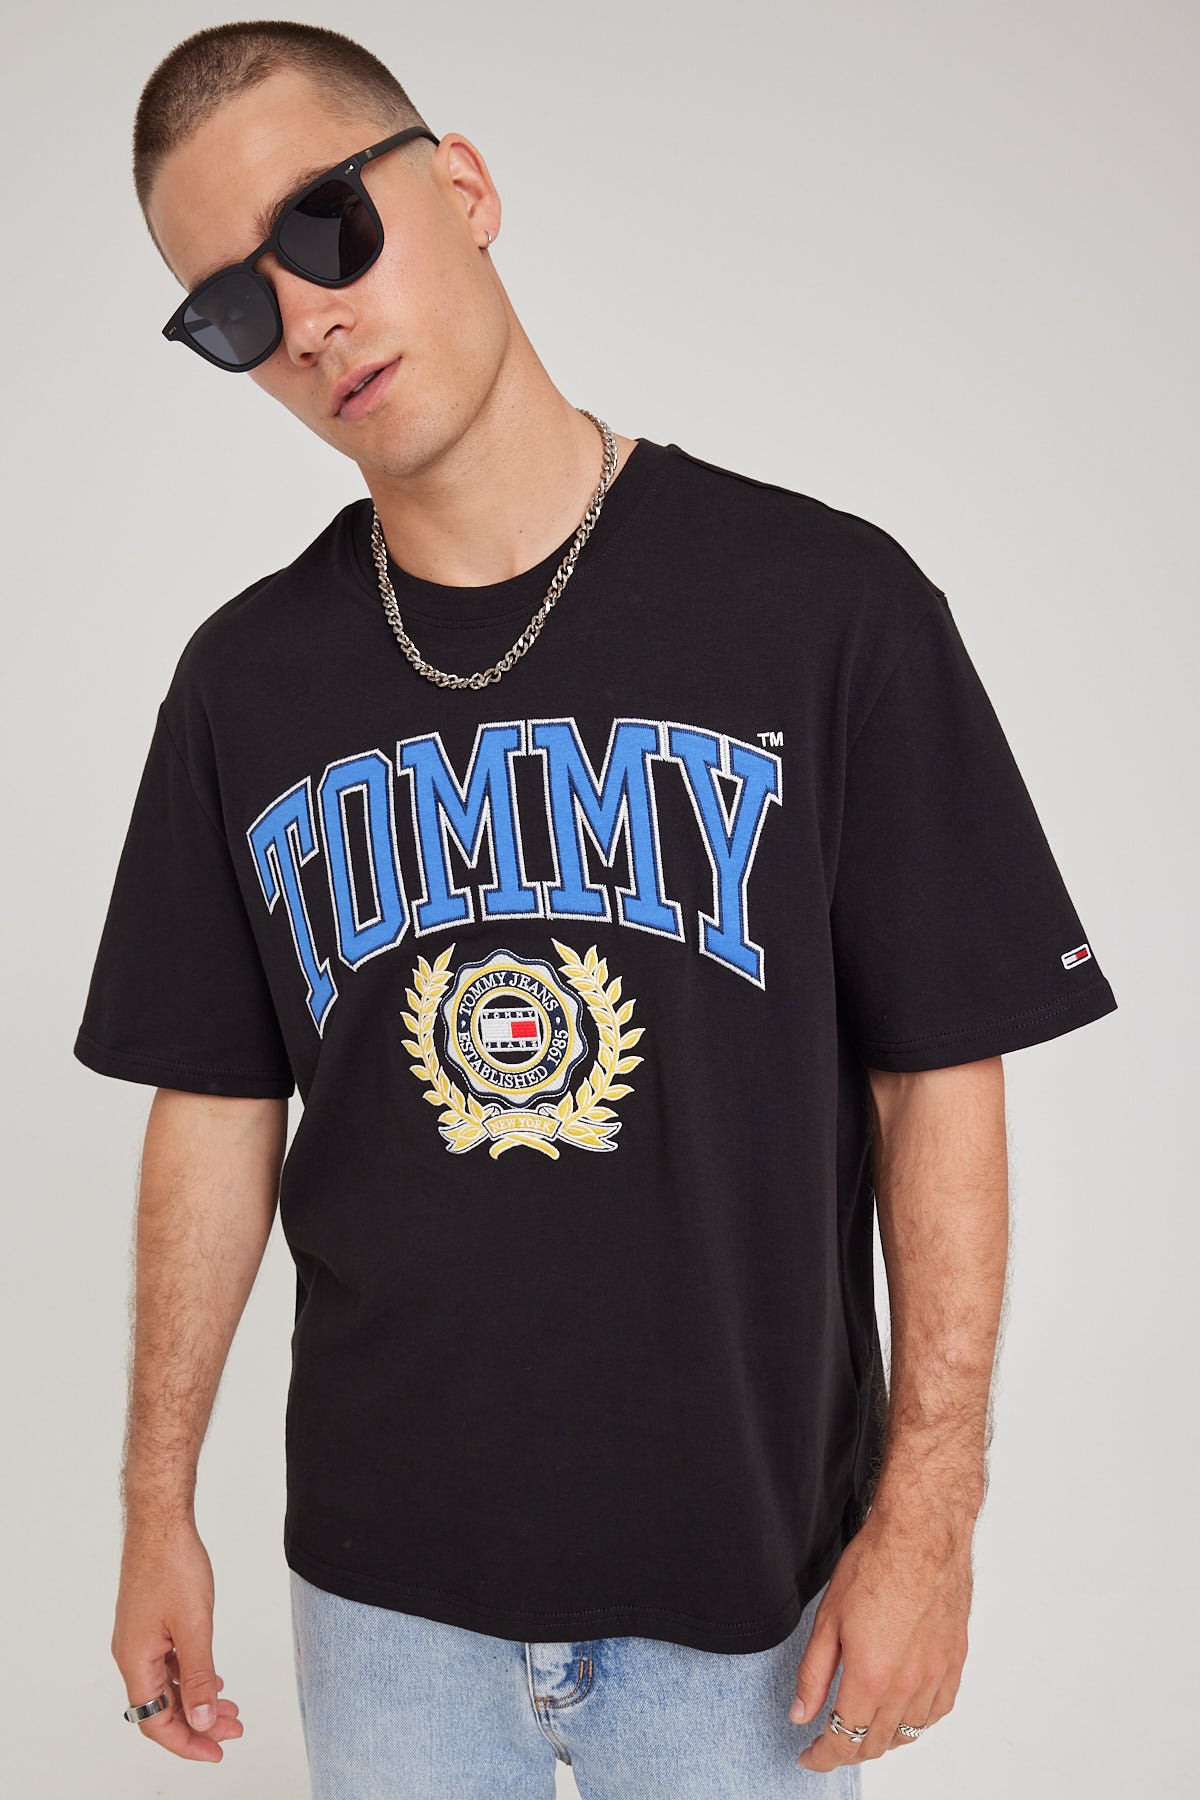 Universal Skater Tommy RBW White TJM Tee Store College Jeans –